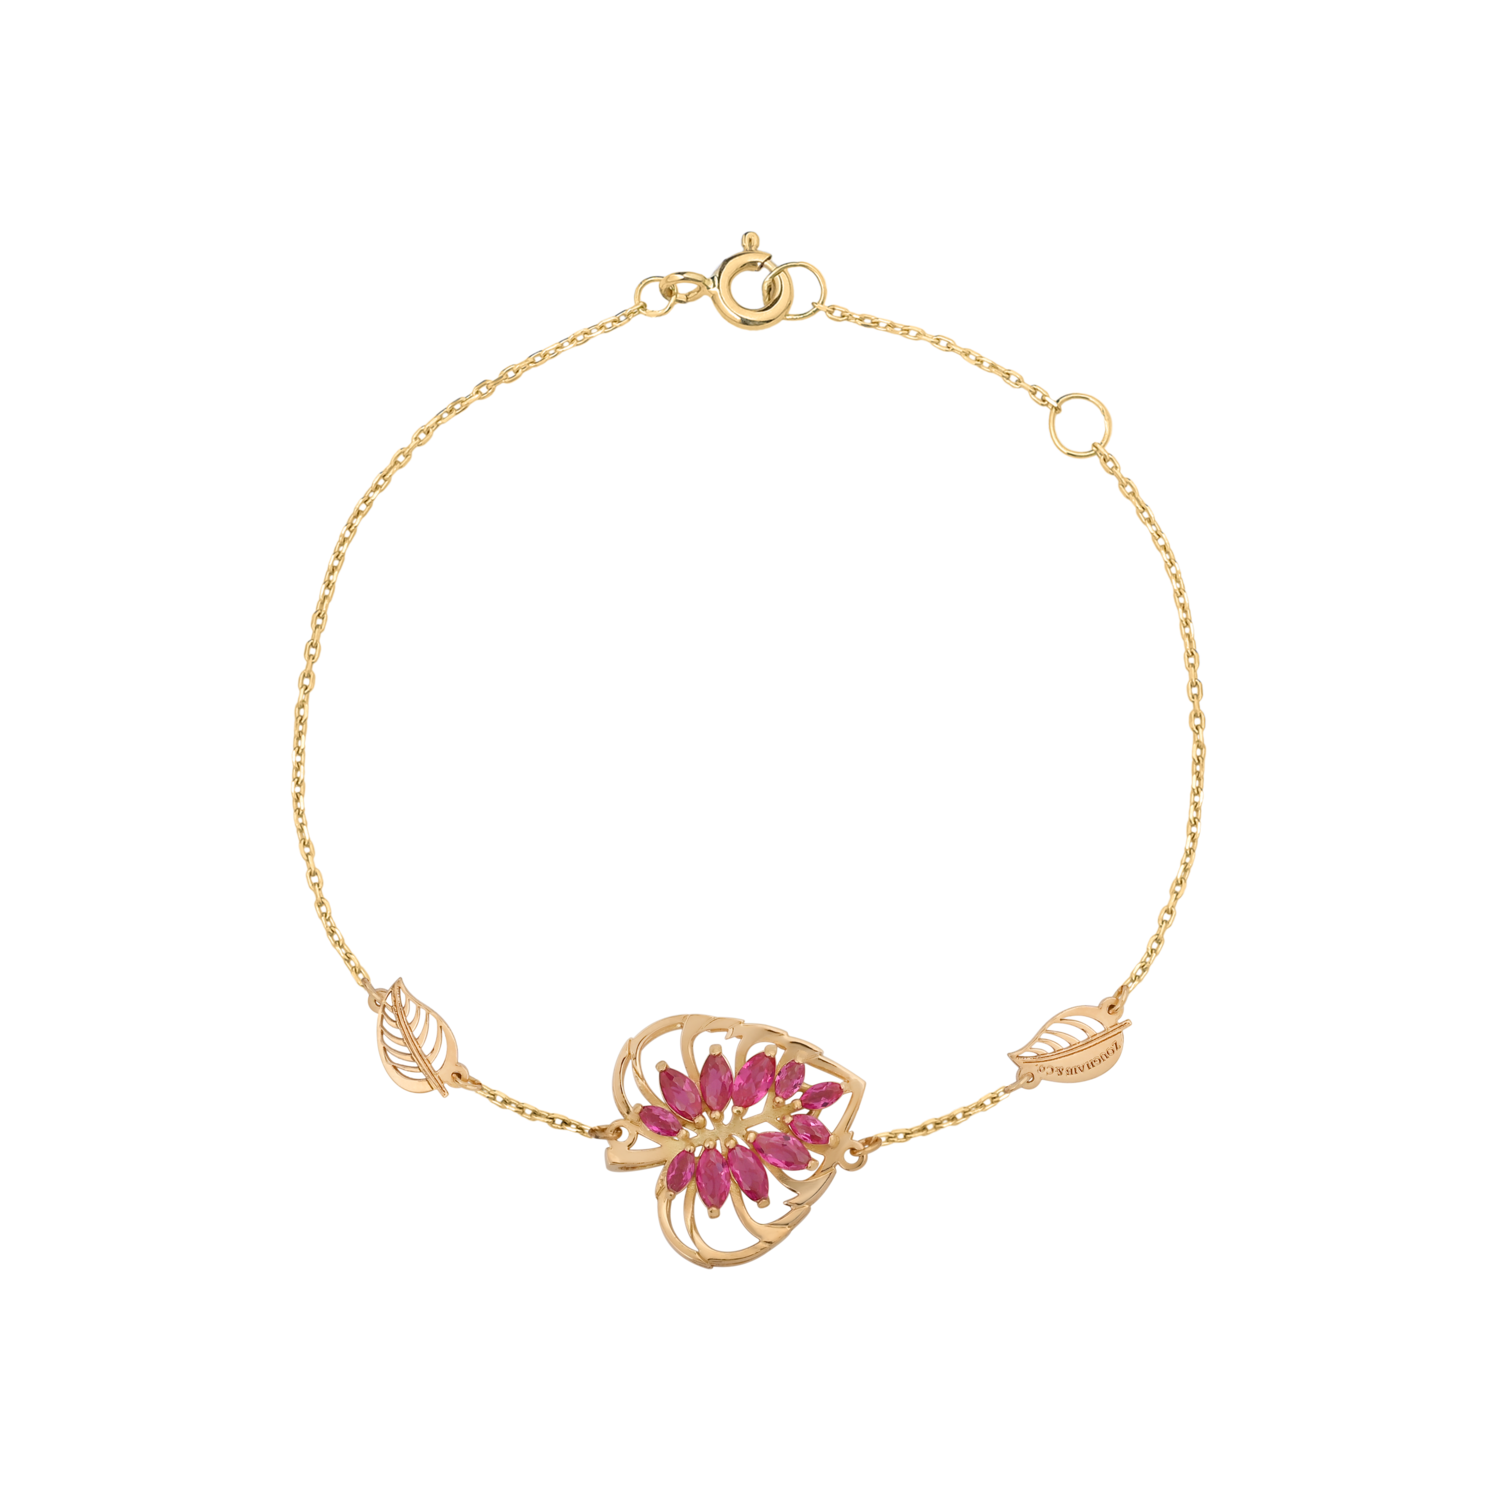 Leaves Gold Bracelet Heart with Colored Stones